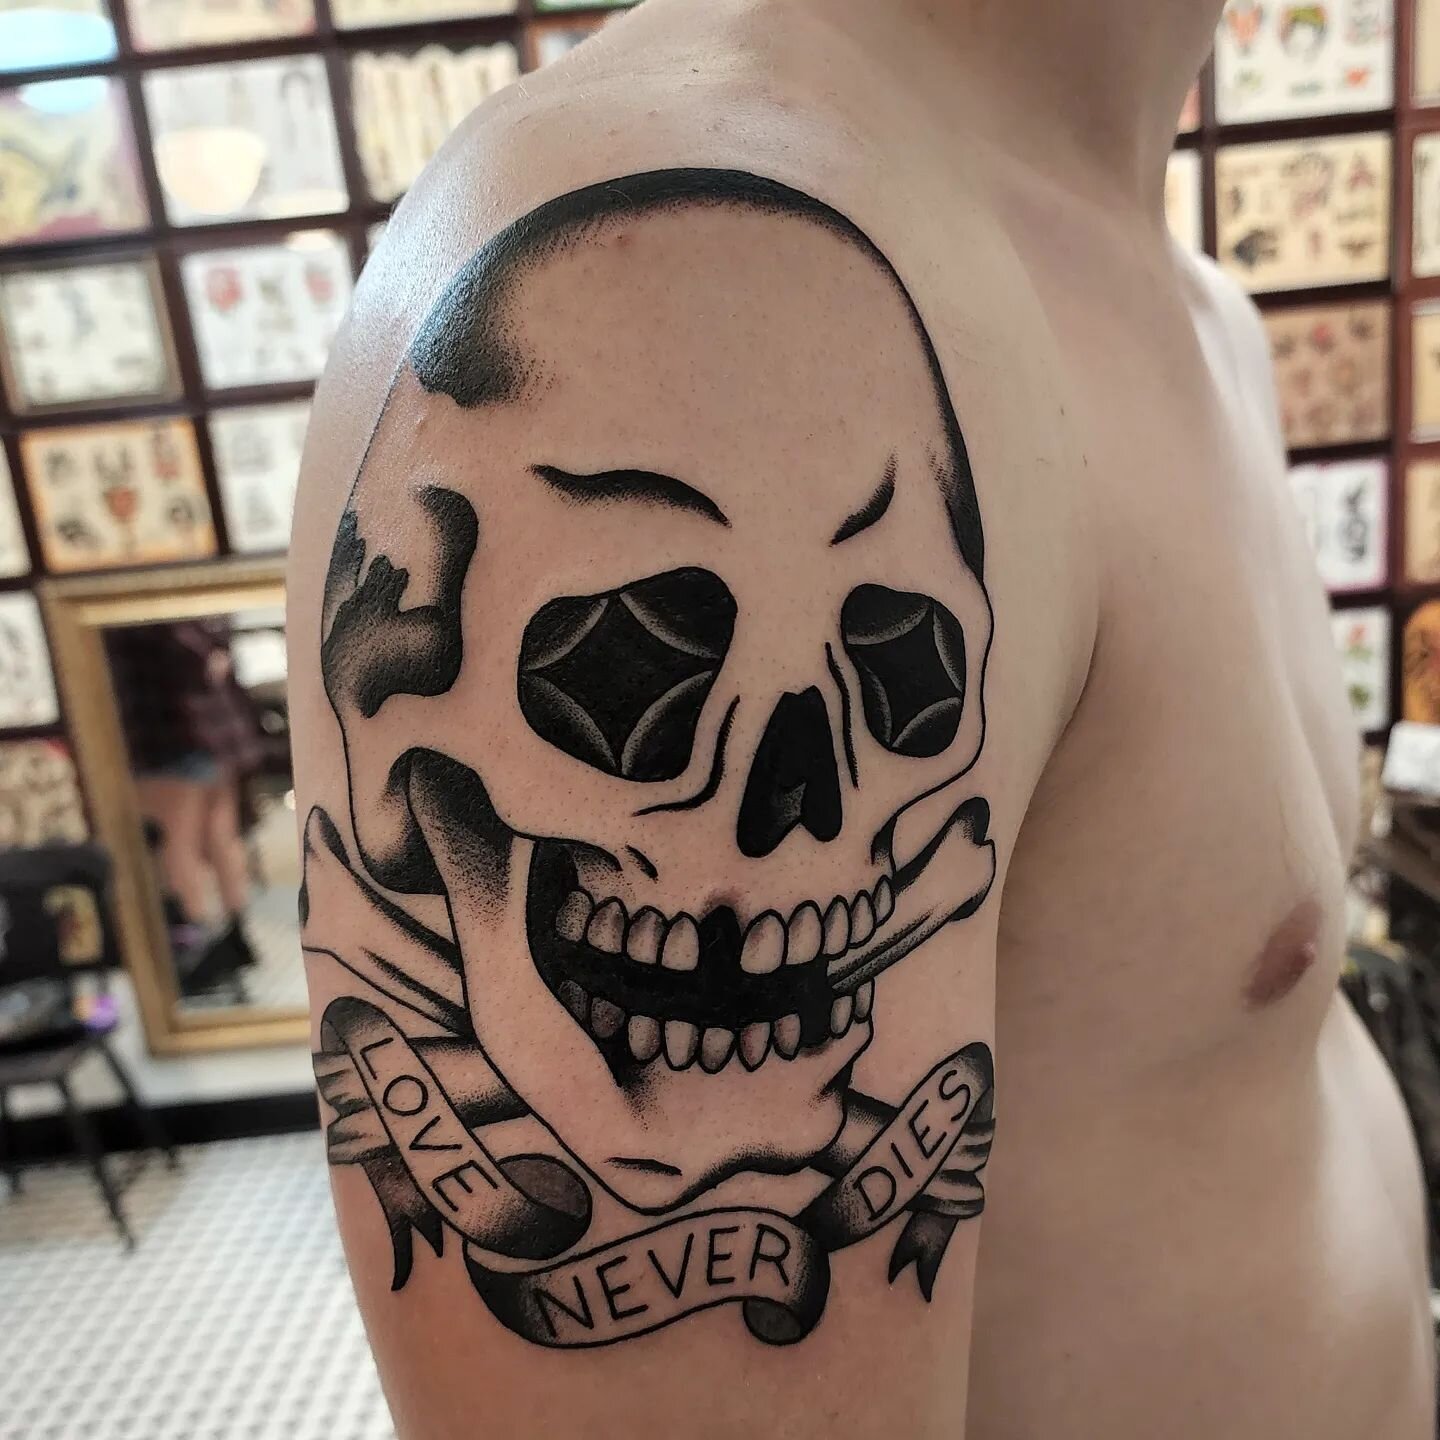 Thanks Chris, what a great start to your sleeve! #loveneverdies #traditionaltattoo #skulltattoo #sleevetattoo #arkansastattooartist #arkansastattoos #nlr #lrafb #thenaturalstate